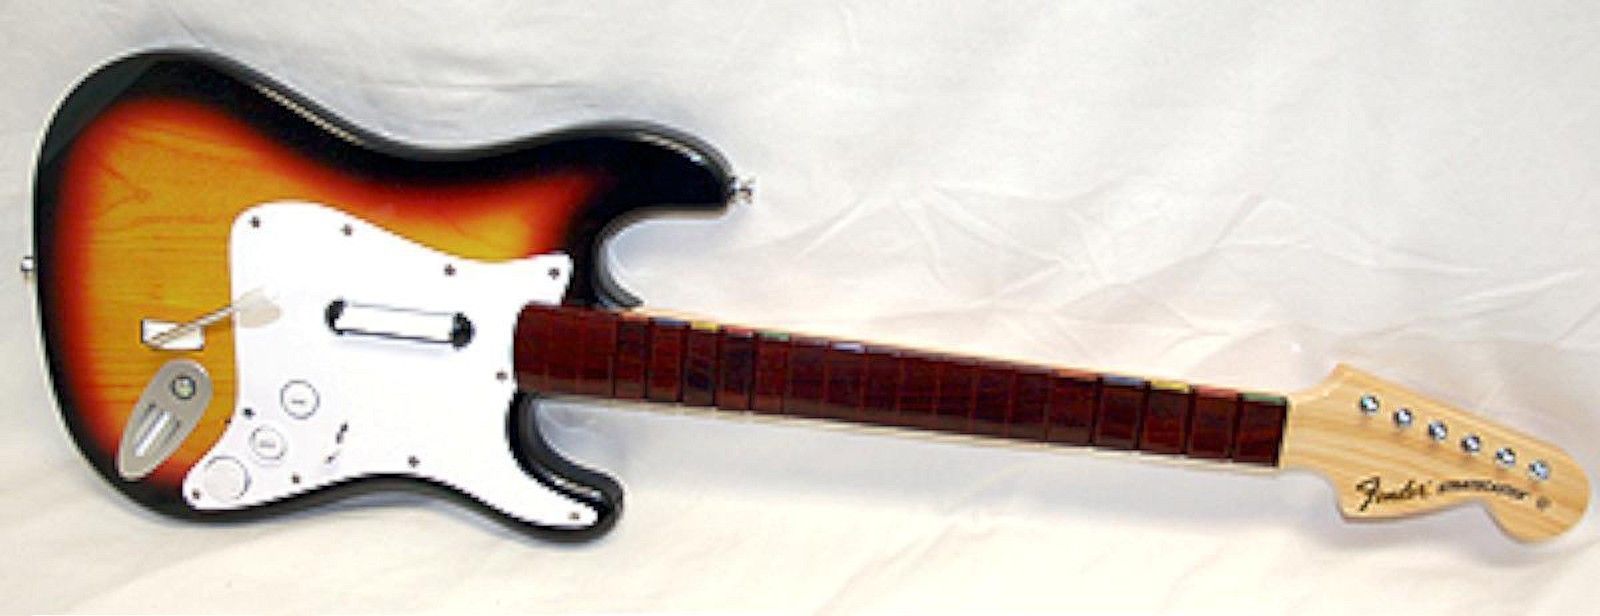 WII: ROCK BAND 2 GUITAR - FENDER STRATOCASTER - STARBURST WITHOUT RECEIVER (USED) - Click Image to Close